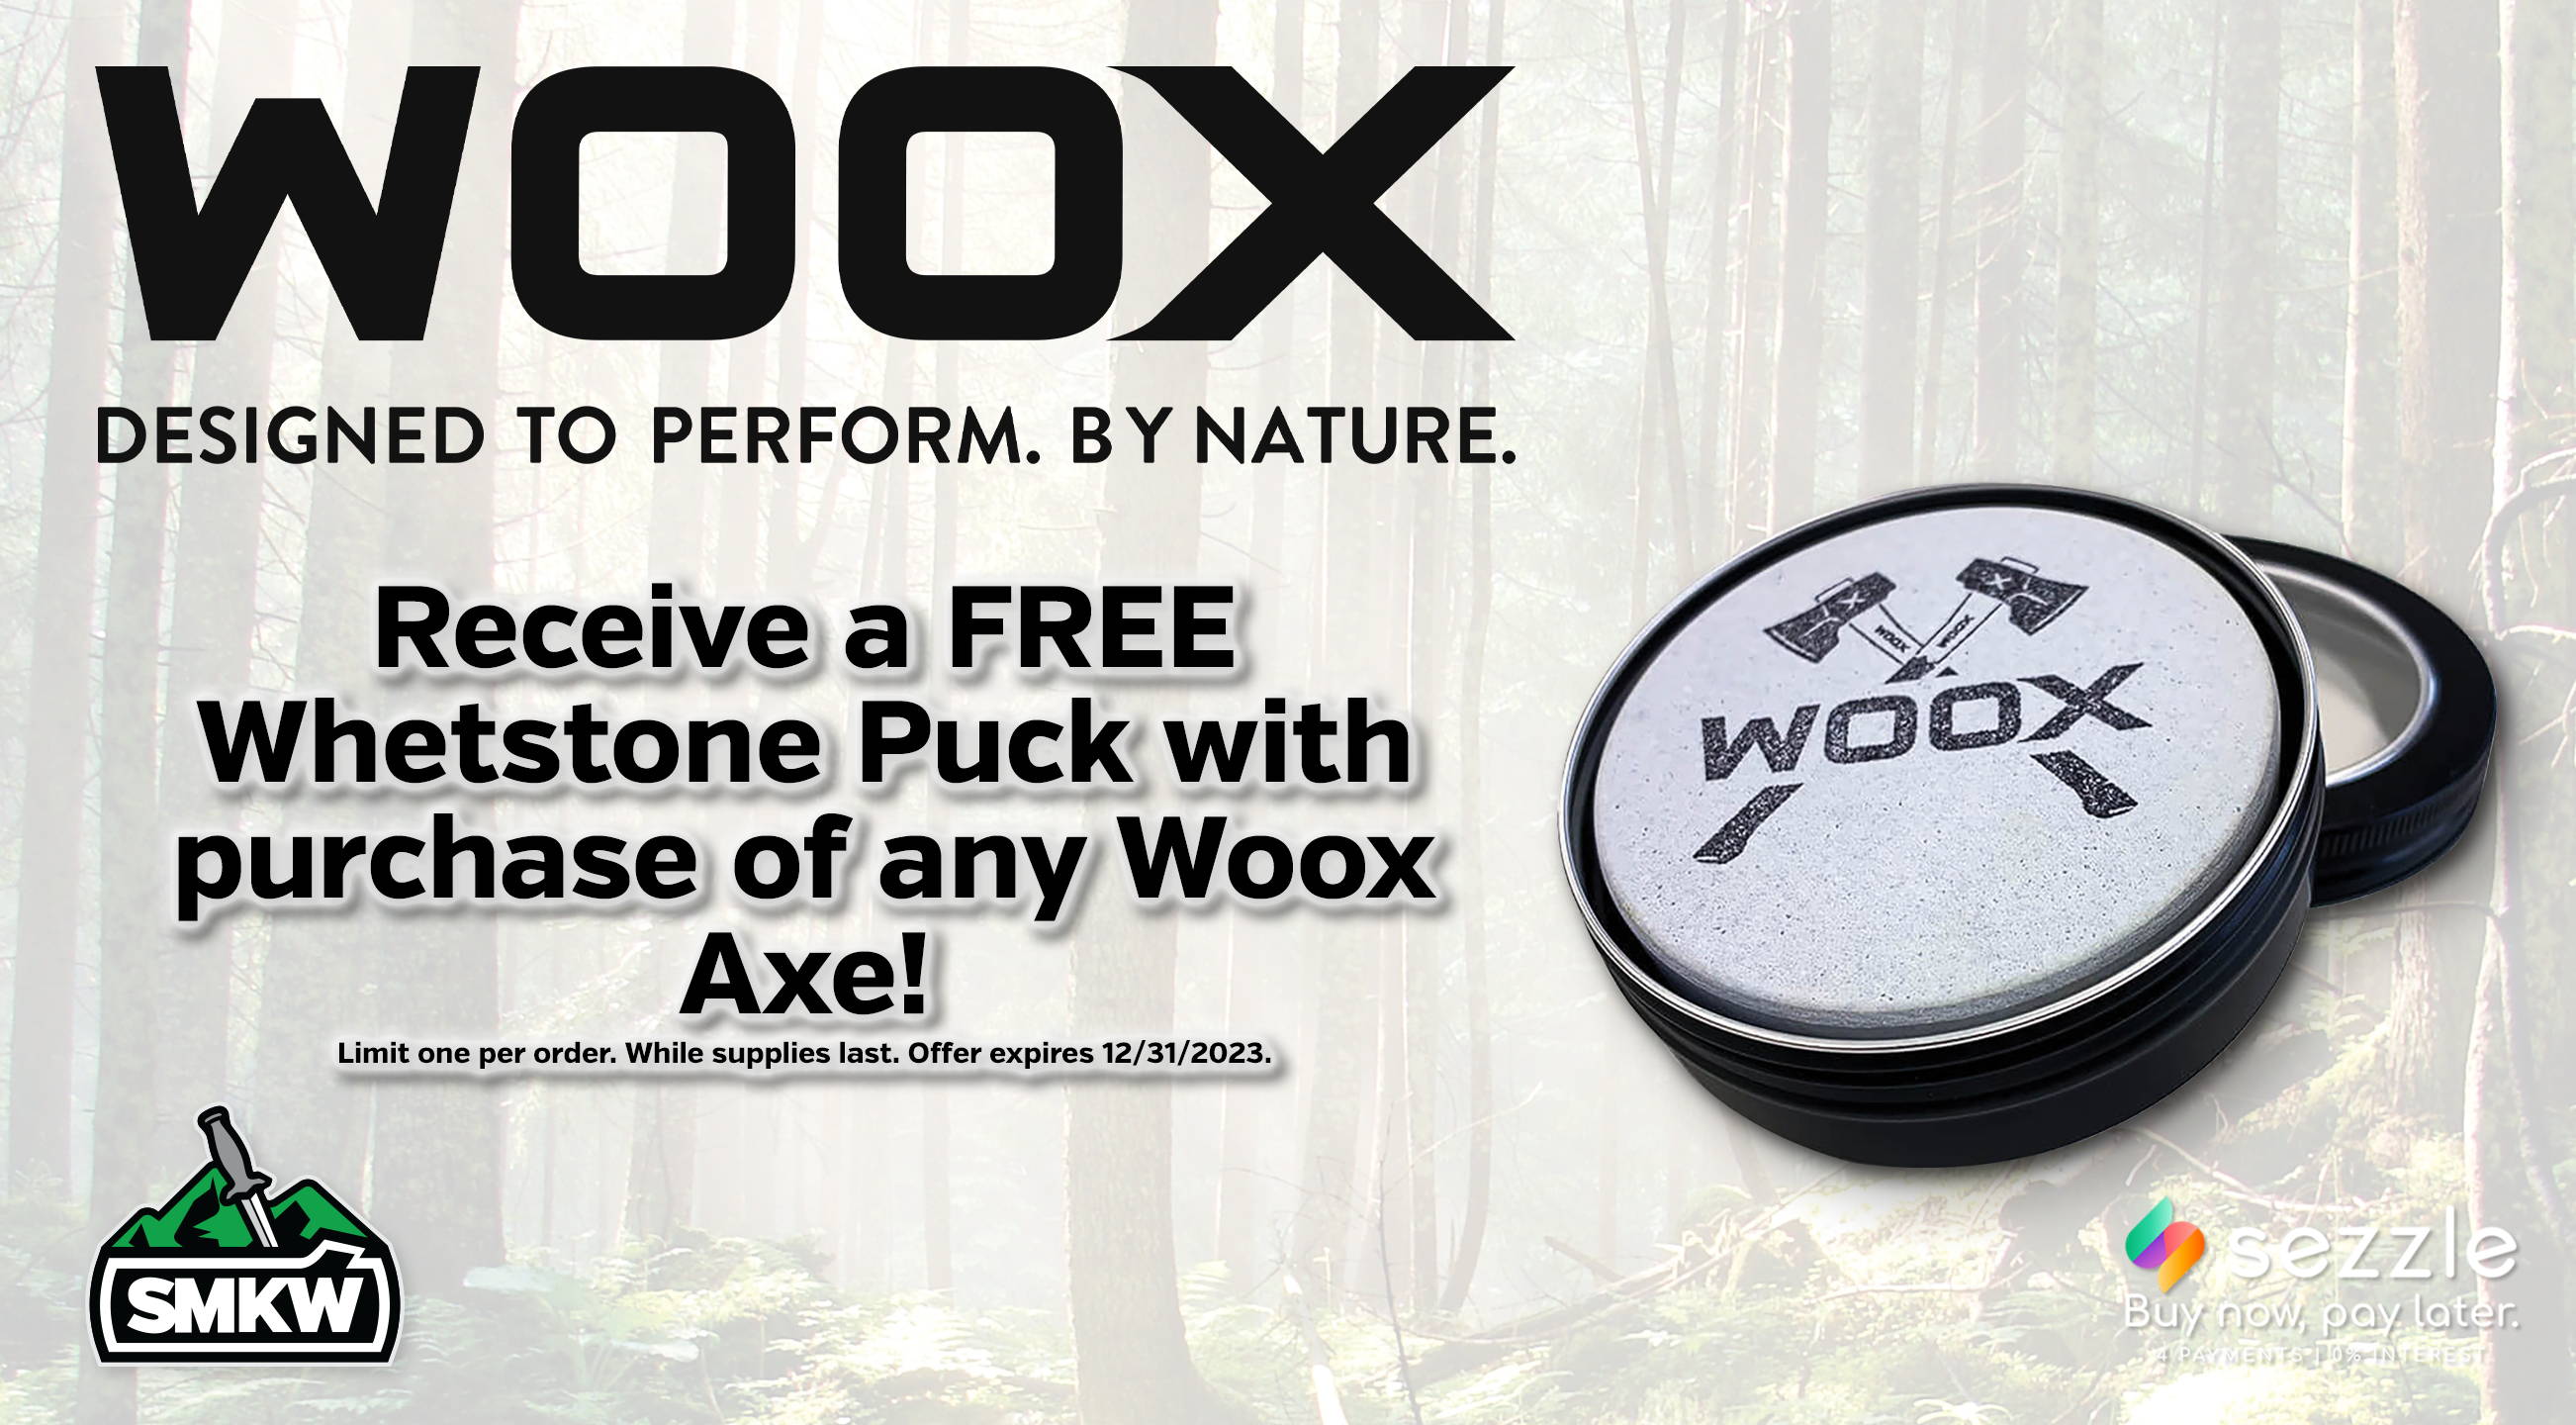 Free Whetstone Puck with any WOOX Axe purchase.